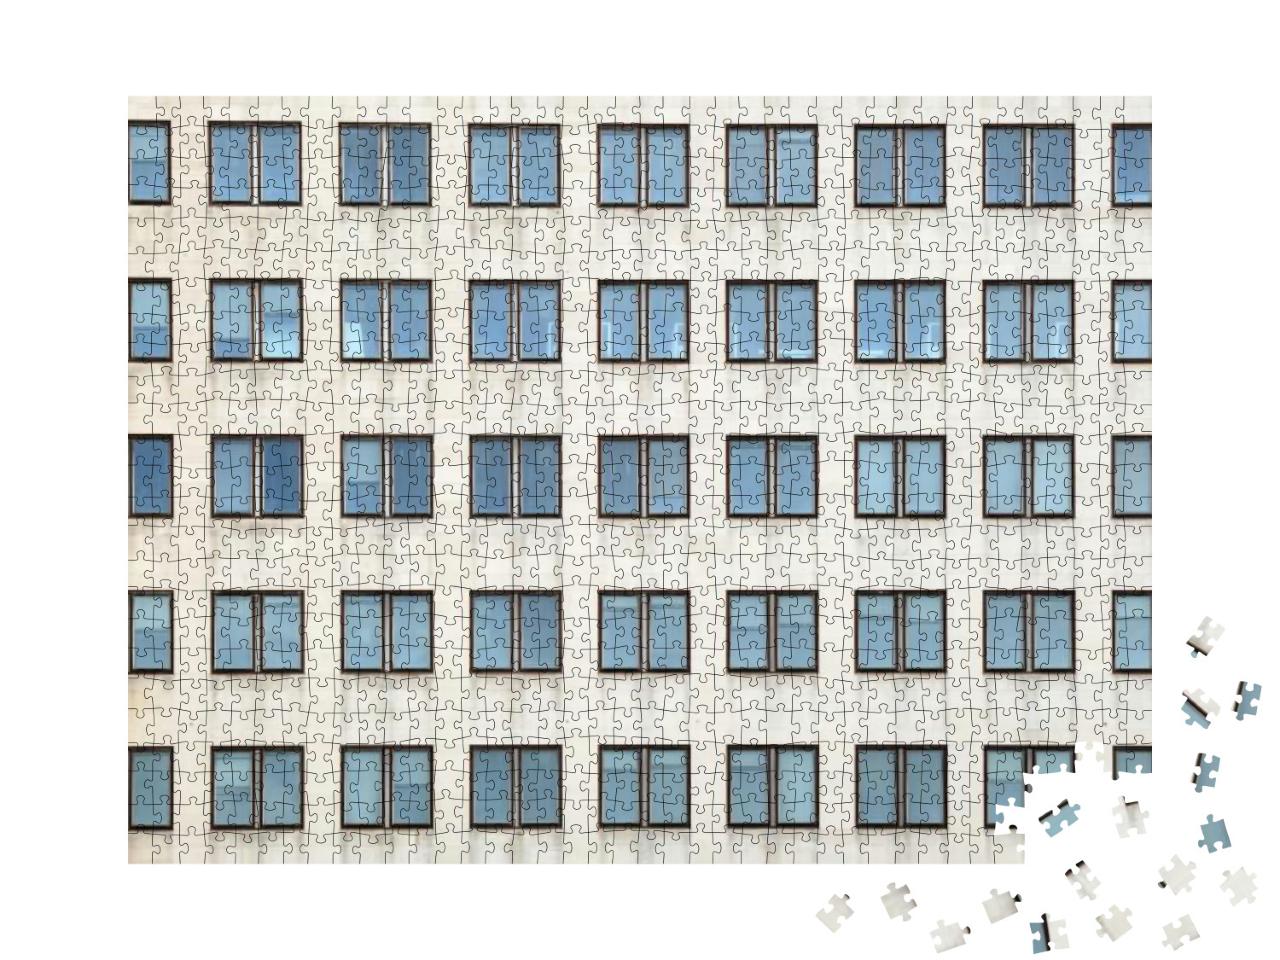 Multiple Closed Windows on a Large Office Building... Jigsaw Puzzle with 1000 pieces